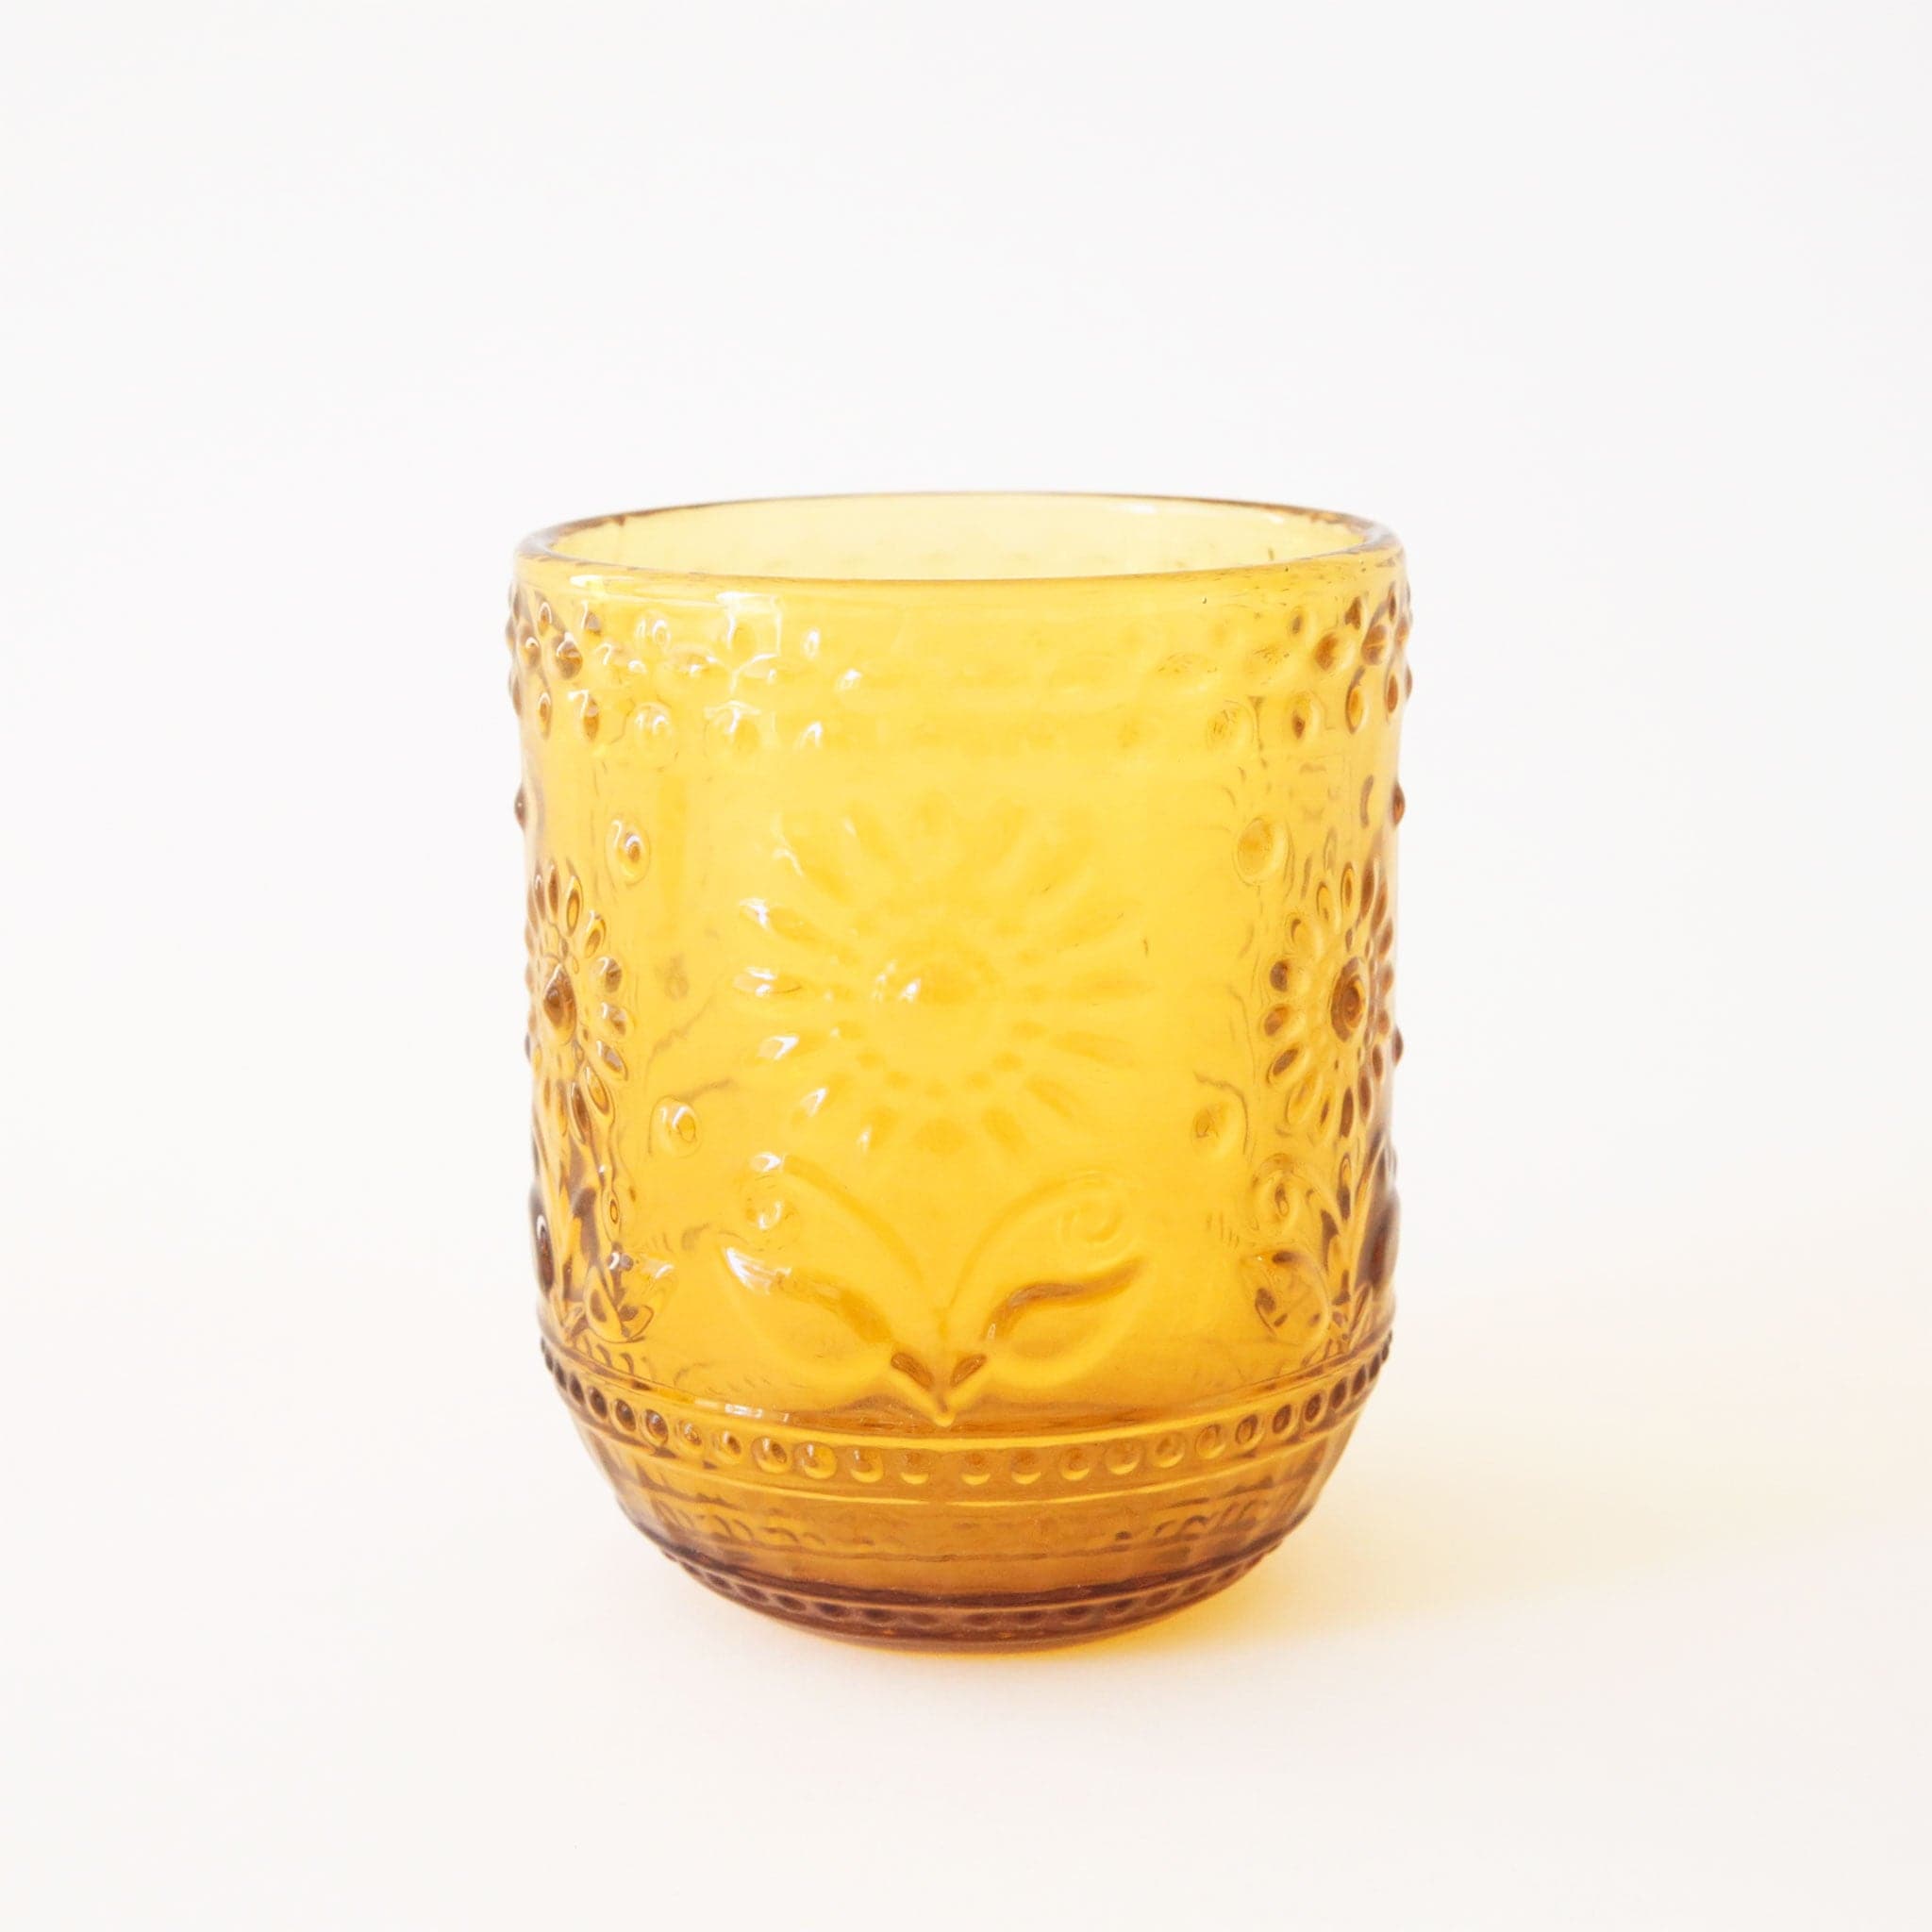 Embossed yellow drinking glass with raised floral detailing.